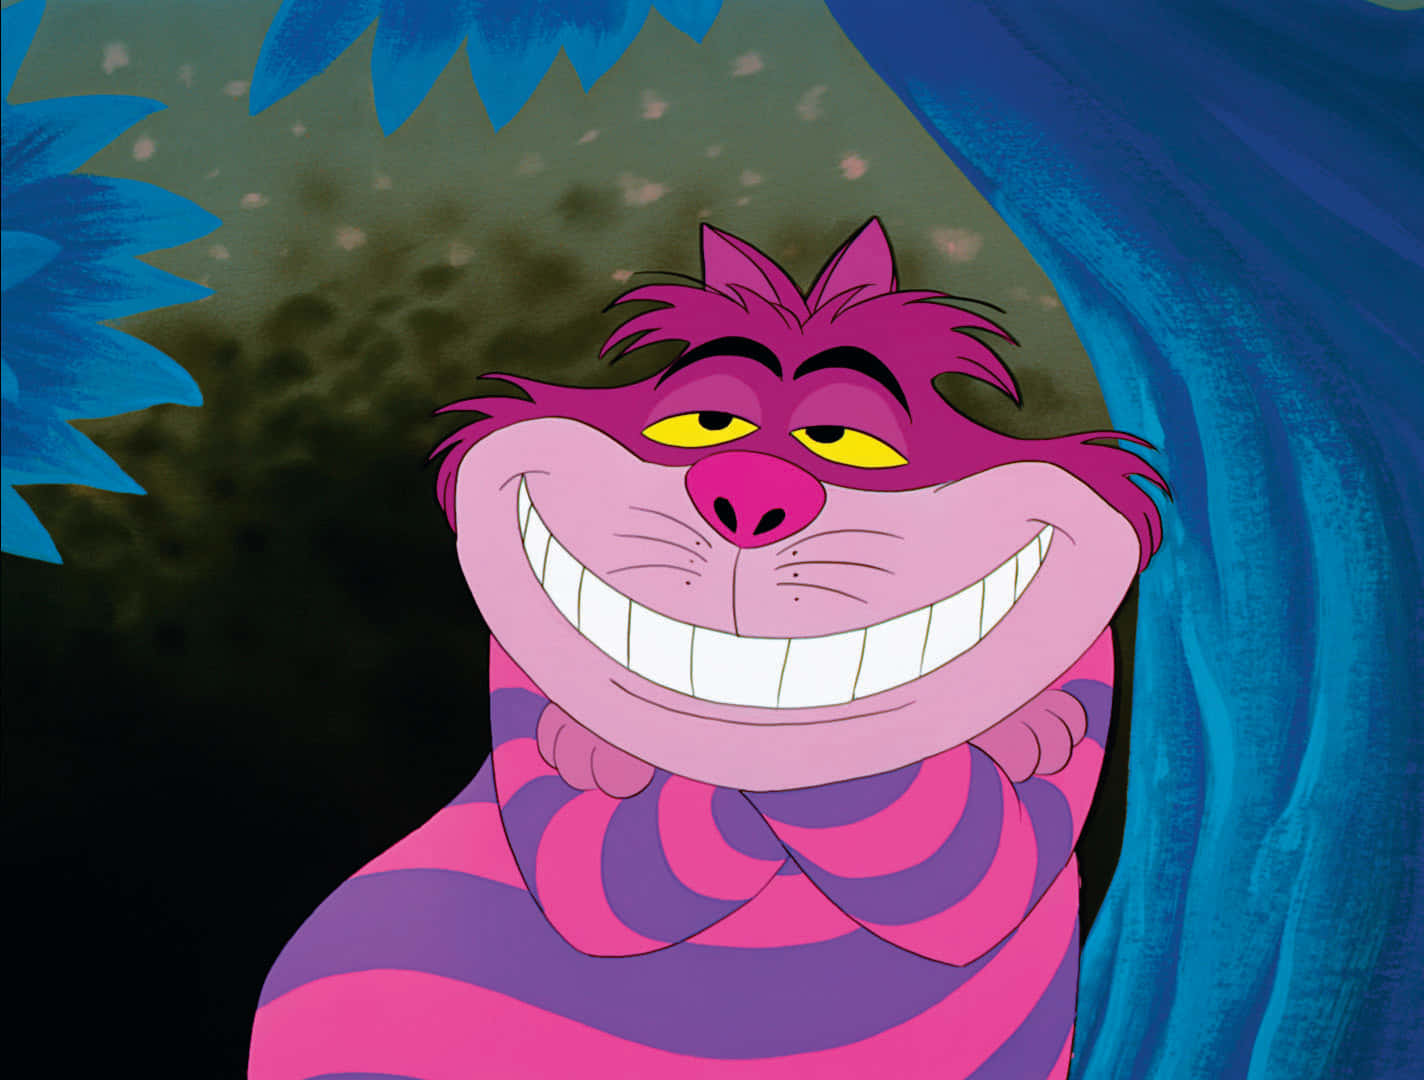 The mischievous Cheshire Cat smiles from atop a mushroom.